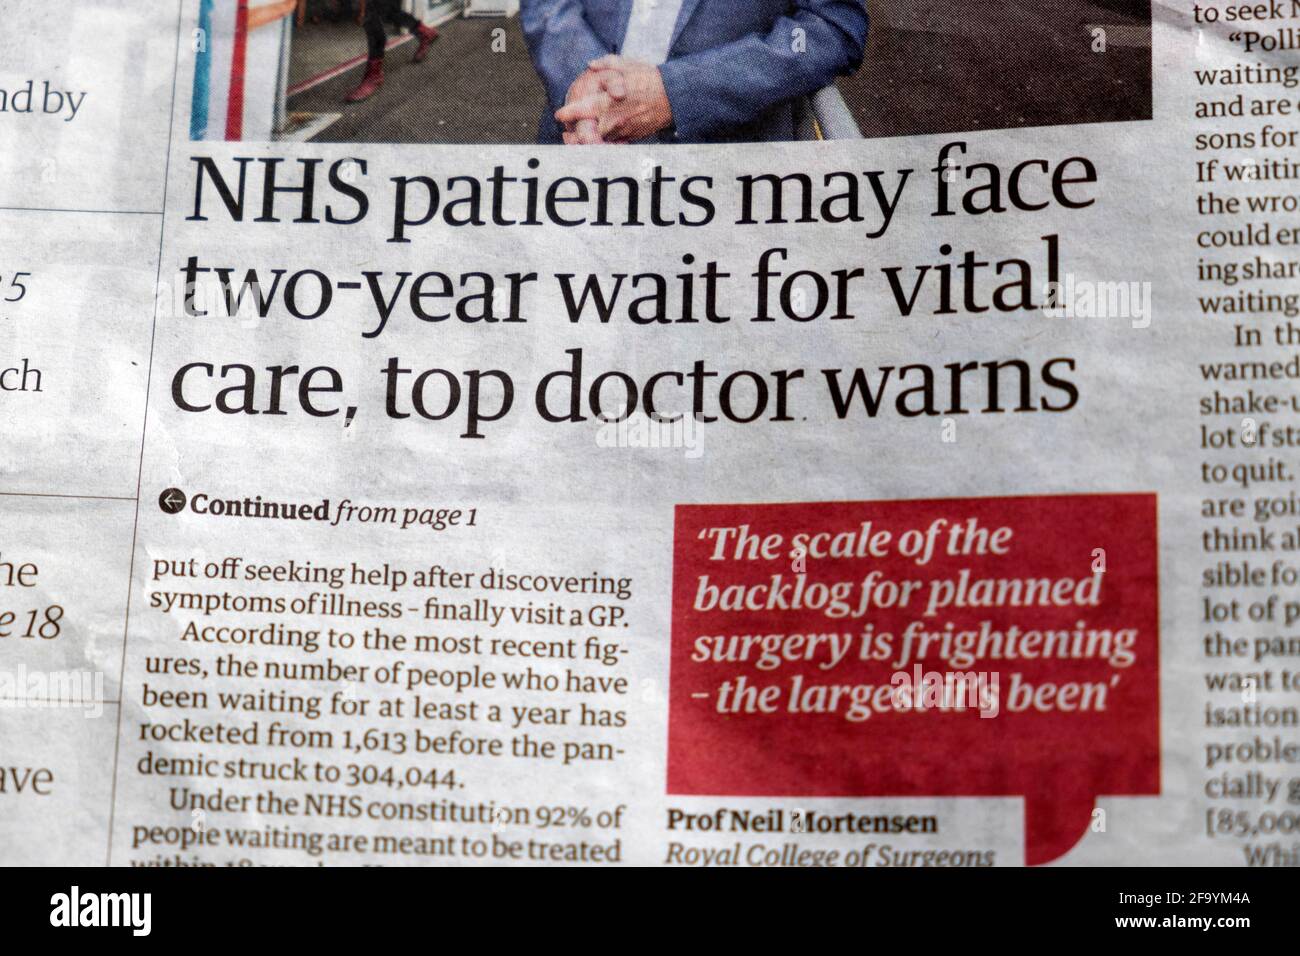 'NHS patients may face two-year wait for vital care, top doctor warns' Covid newspaper headline article in The Guardian 3 April 2021 London England UK Stock Photo